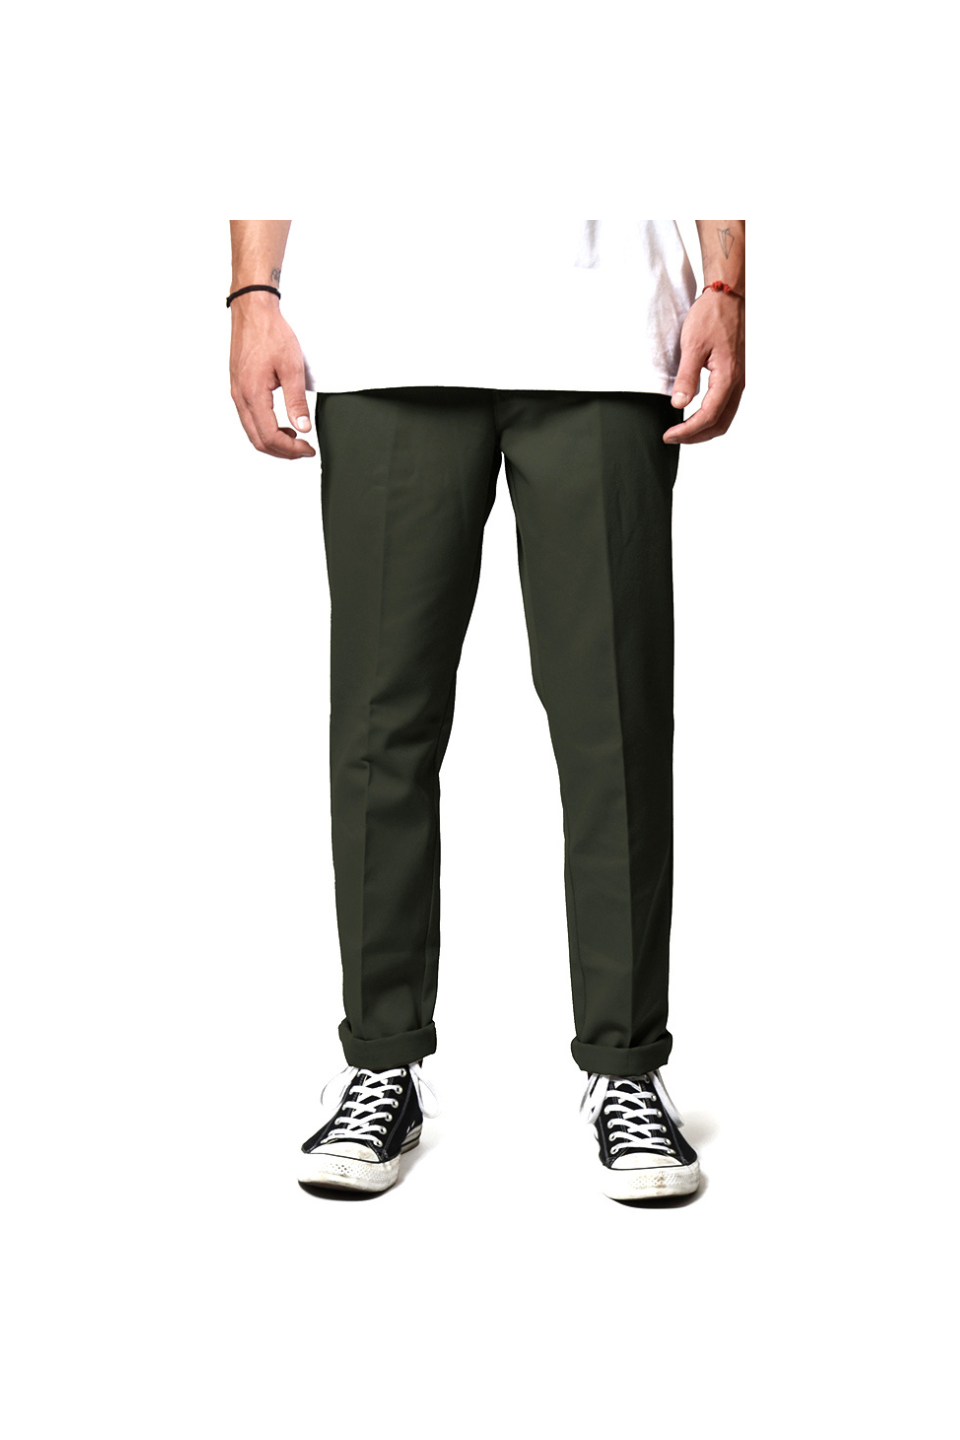 Dickies ANZ on X: The 872 - Olive Green. Pre order here: https